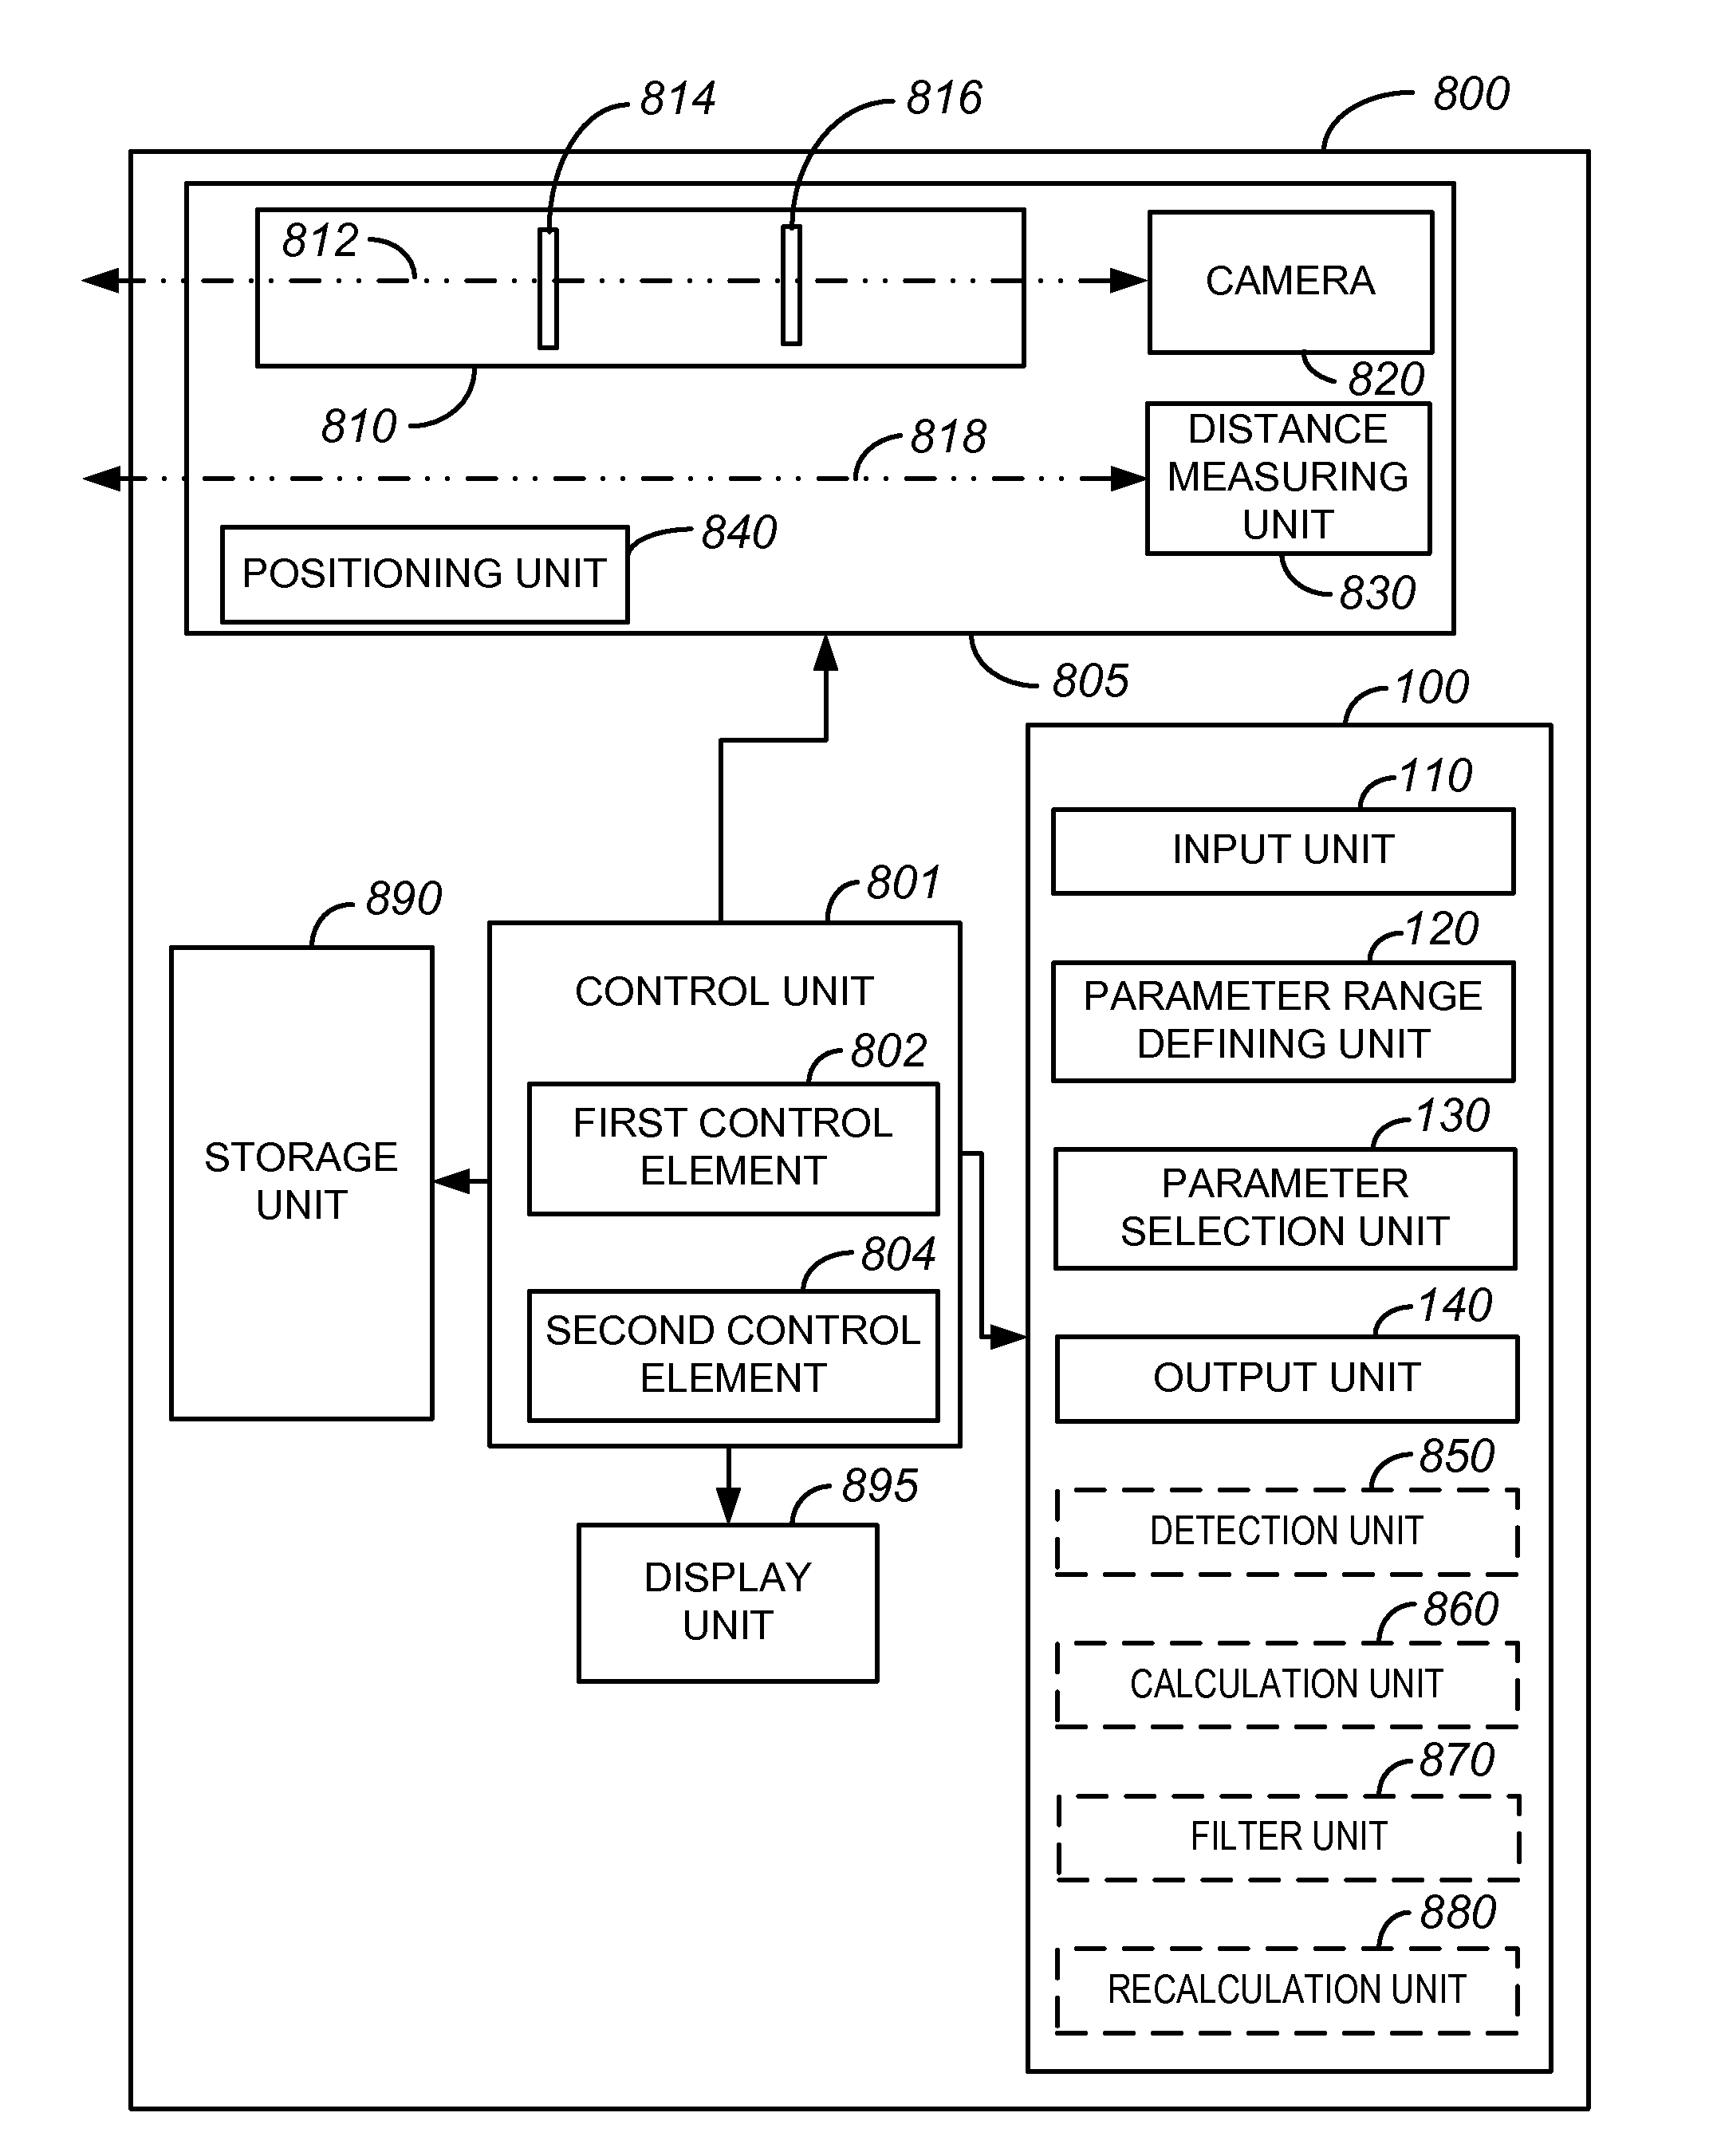 Feature detection apparatus and method for measuring object distances